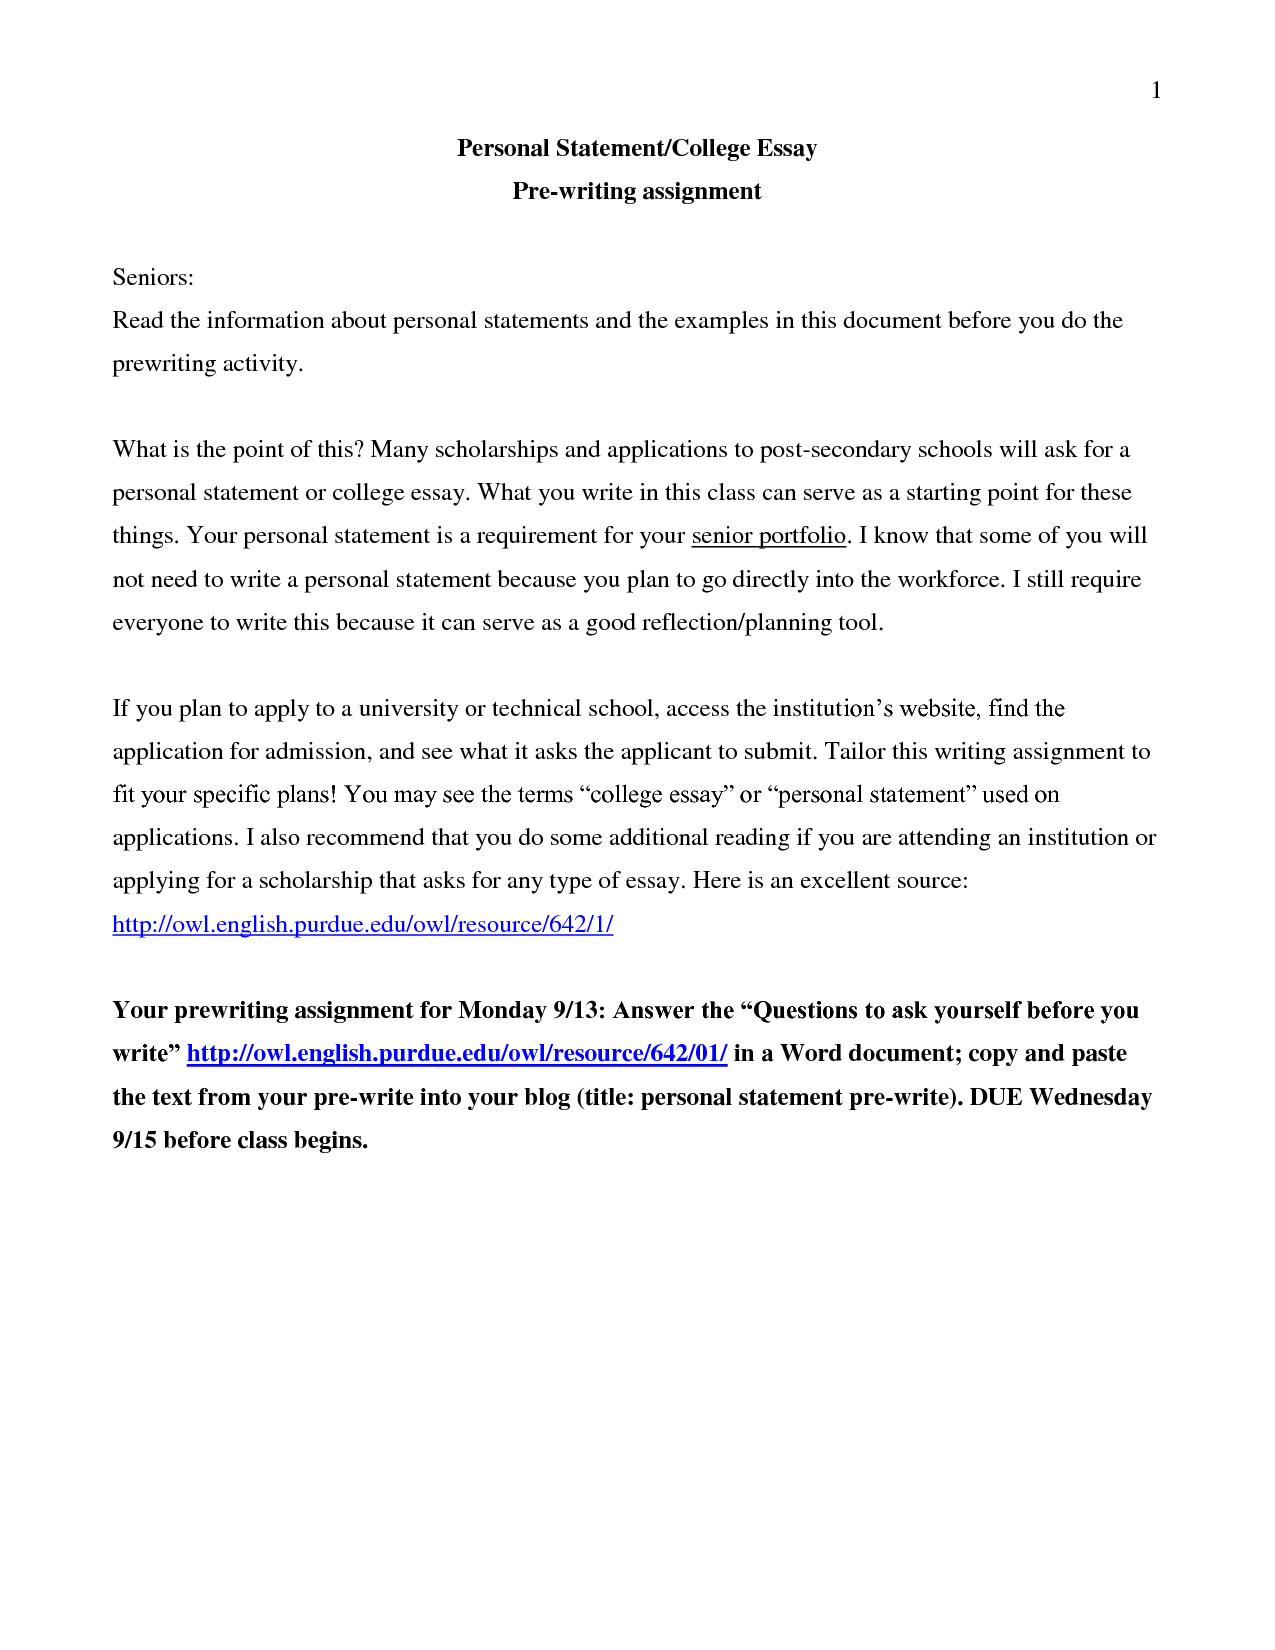 how to write a college essay personal statement